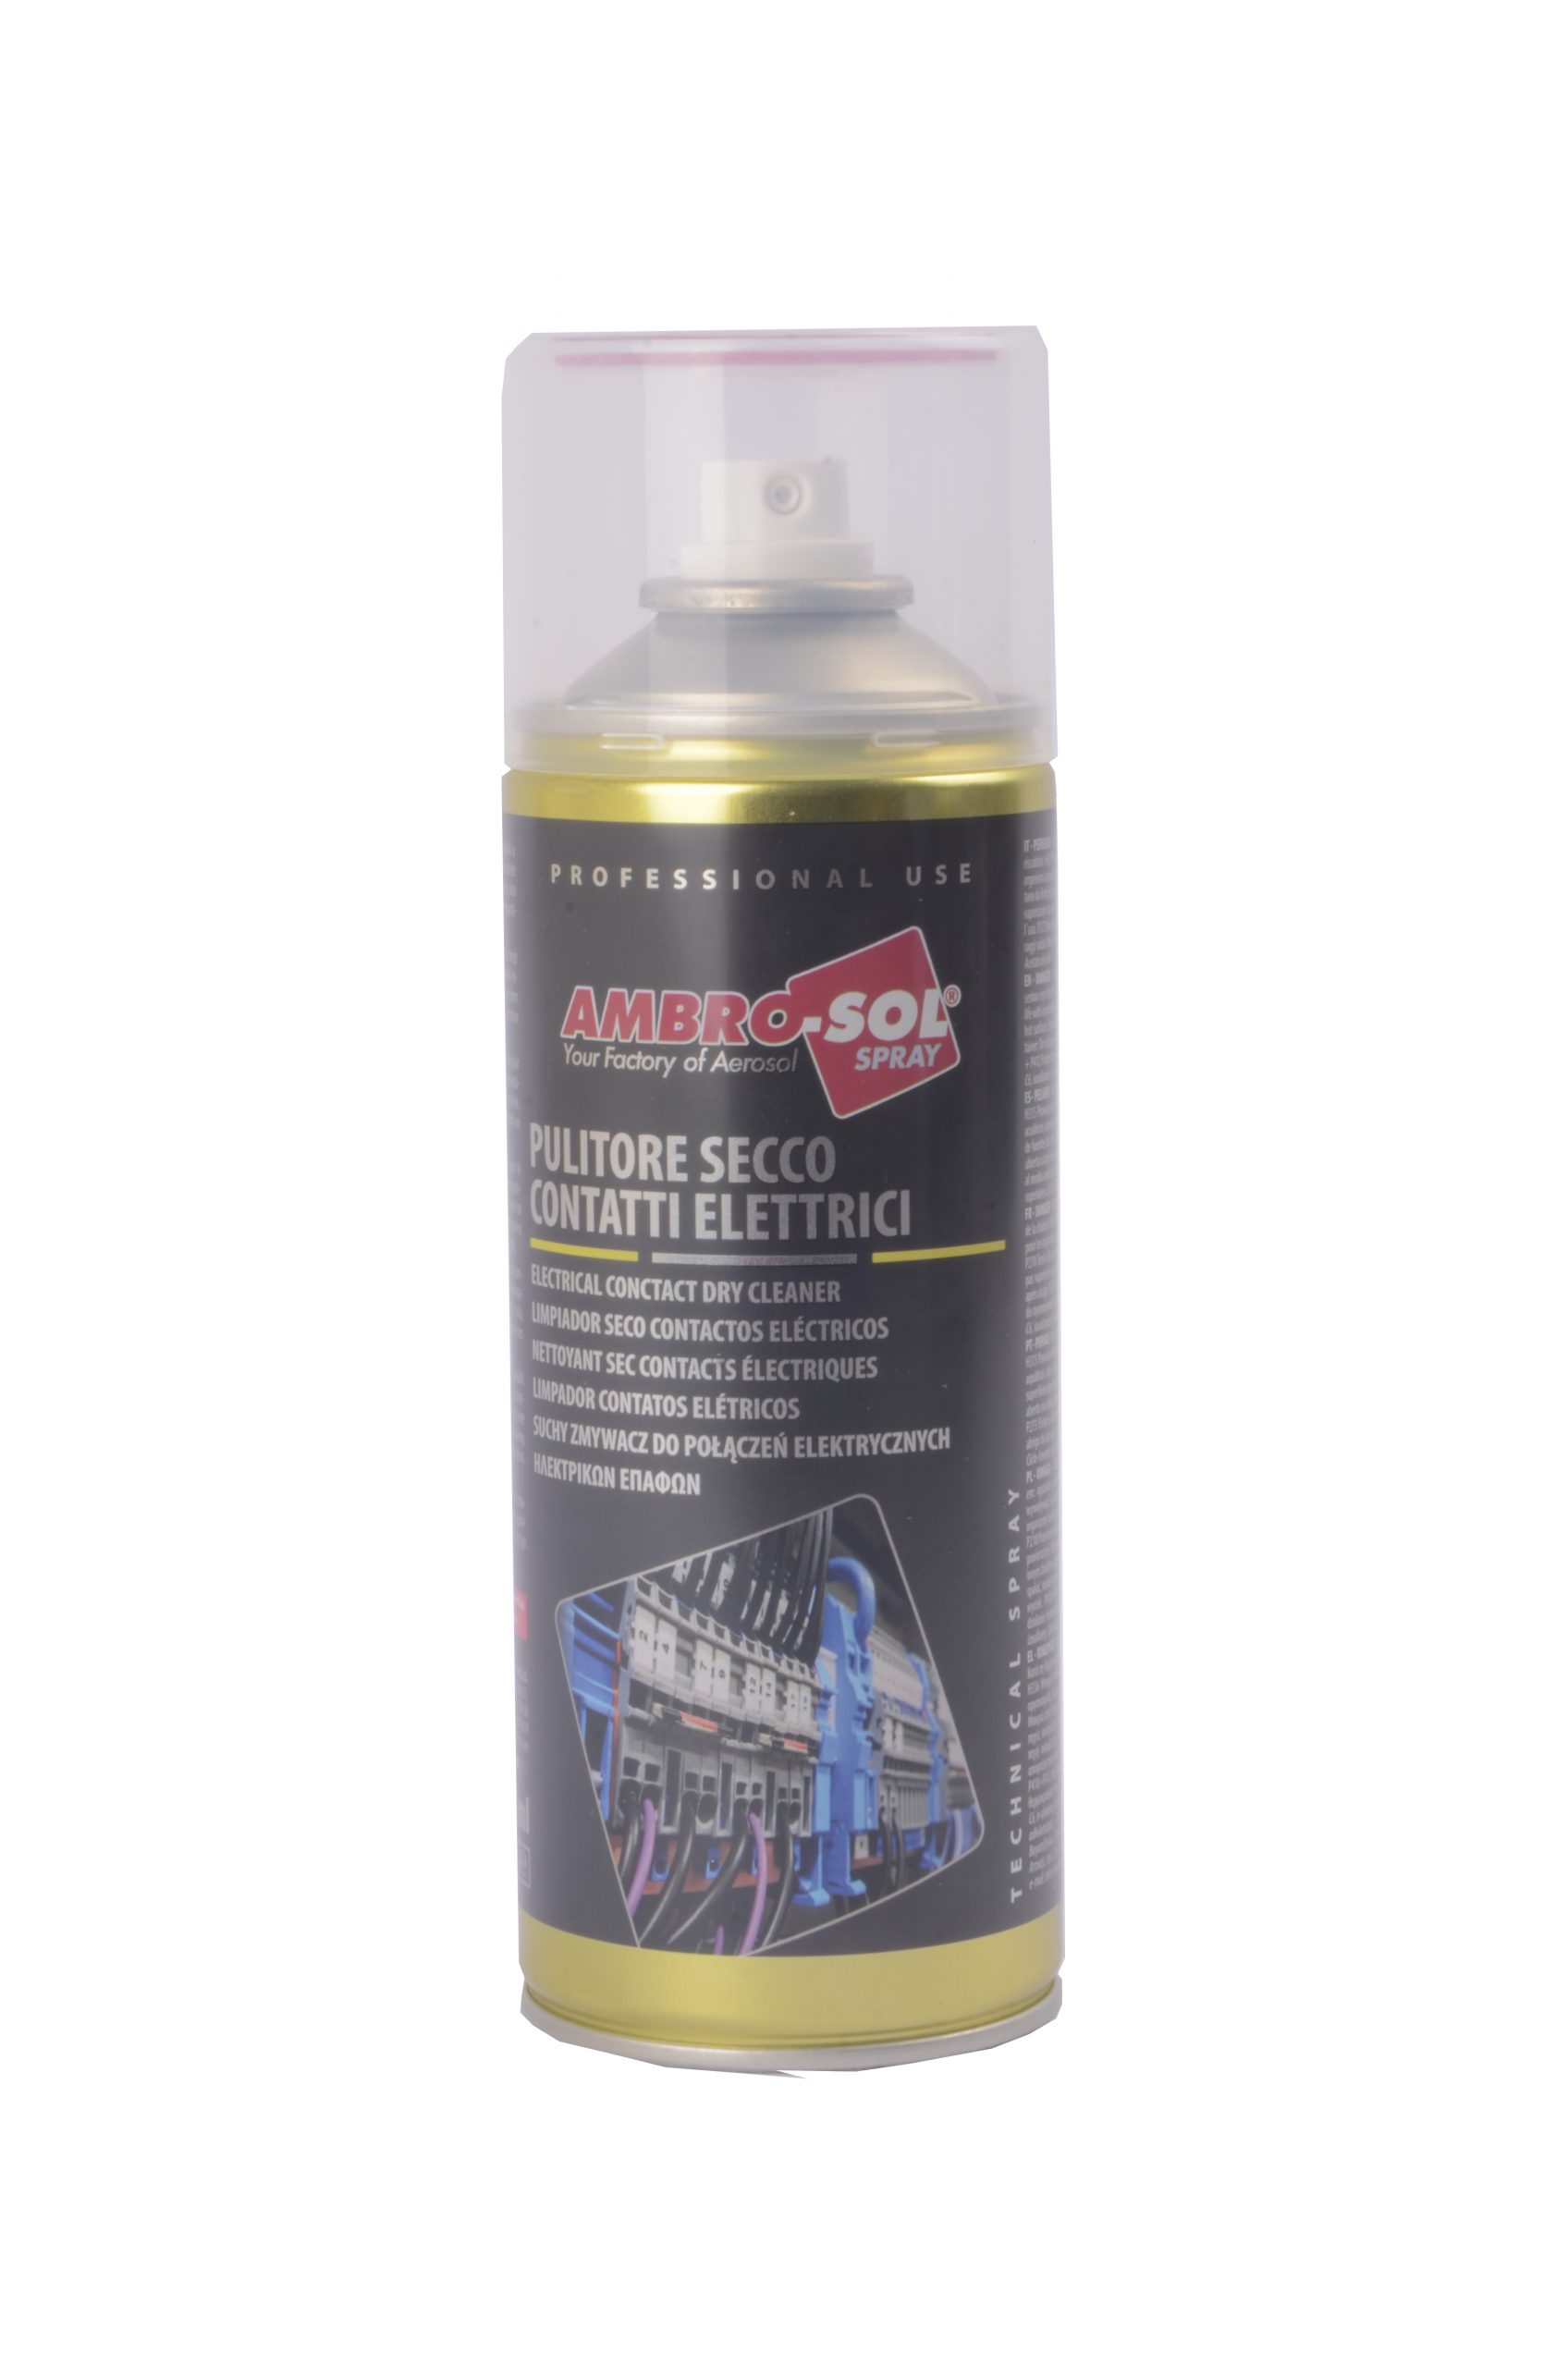 Ambrosol 
	
	Electrical Dry Contact Cleaner
	 |  Hardware and Tools |  Industrial Sprays